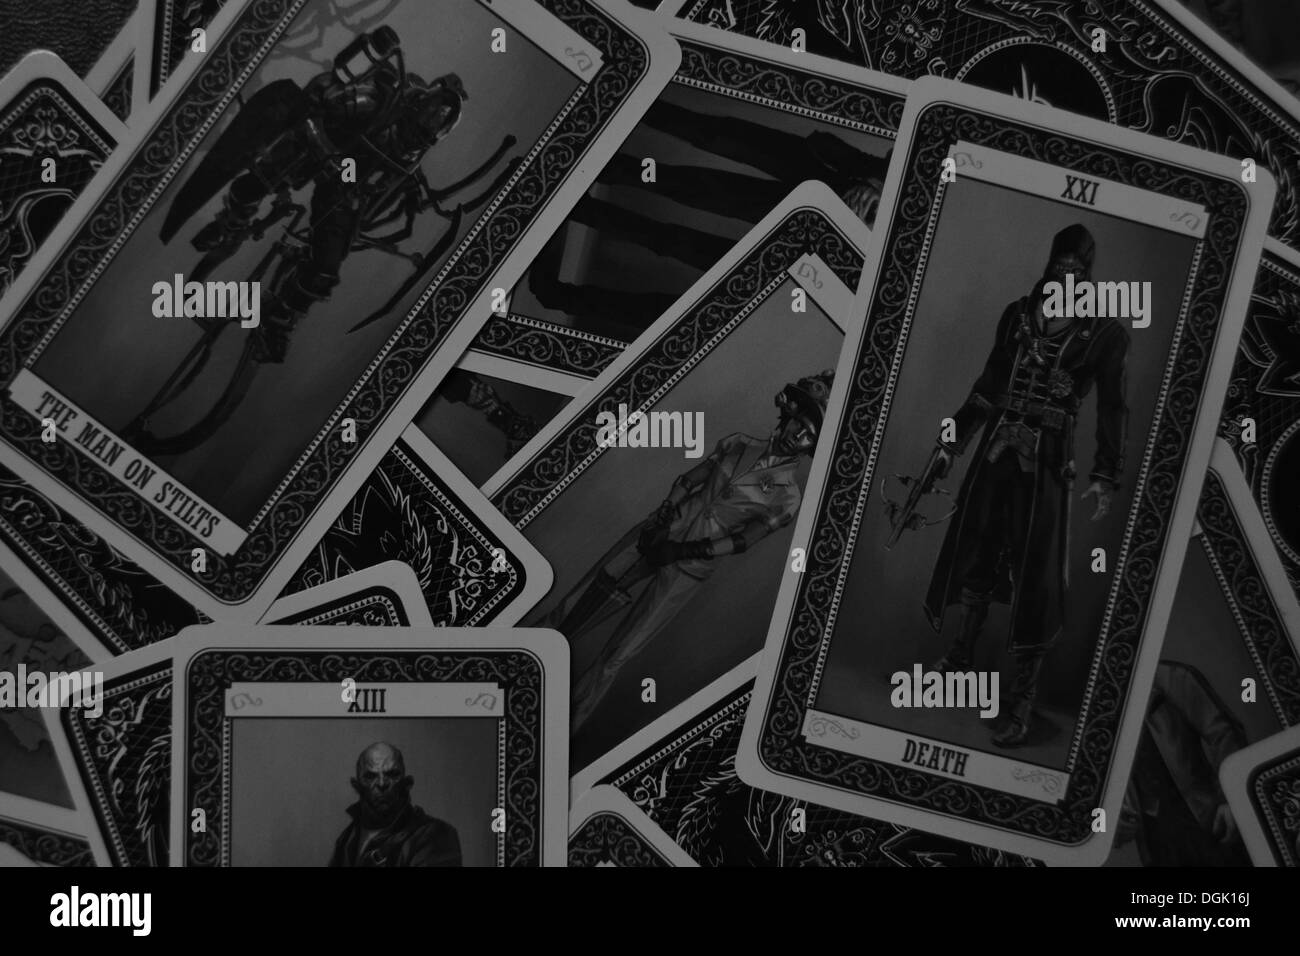 Tarot cards Black and White Stock Photos & Images - Alamy